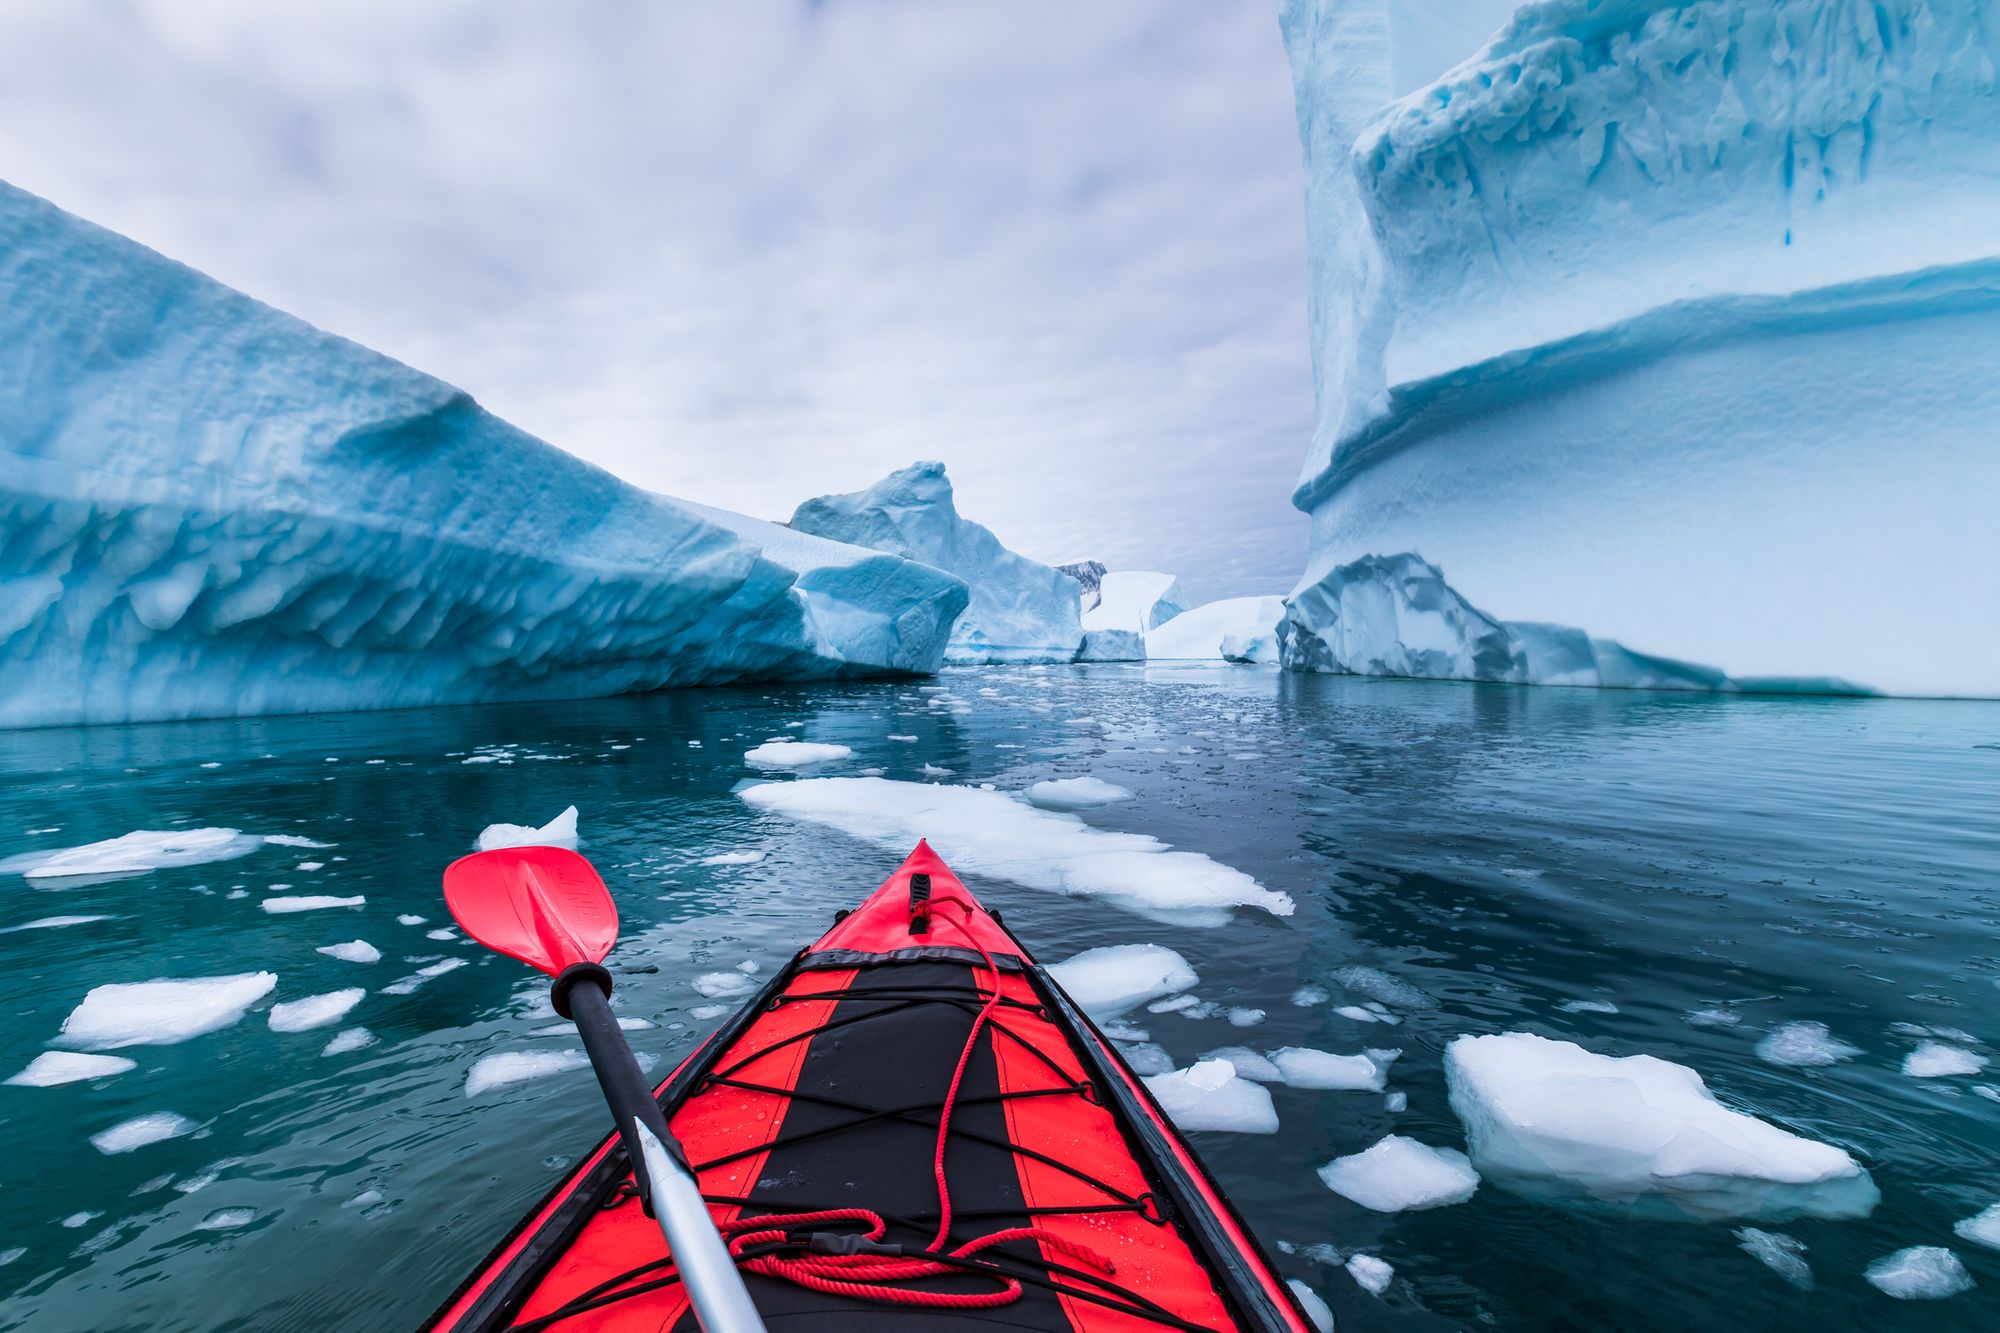 The front of a kayak gliding through icy Antarctic waters, with icebergs in the background.